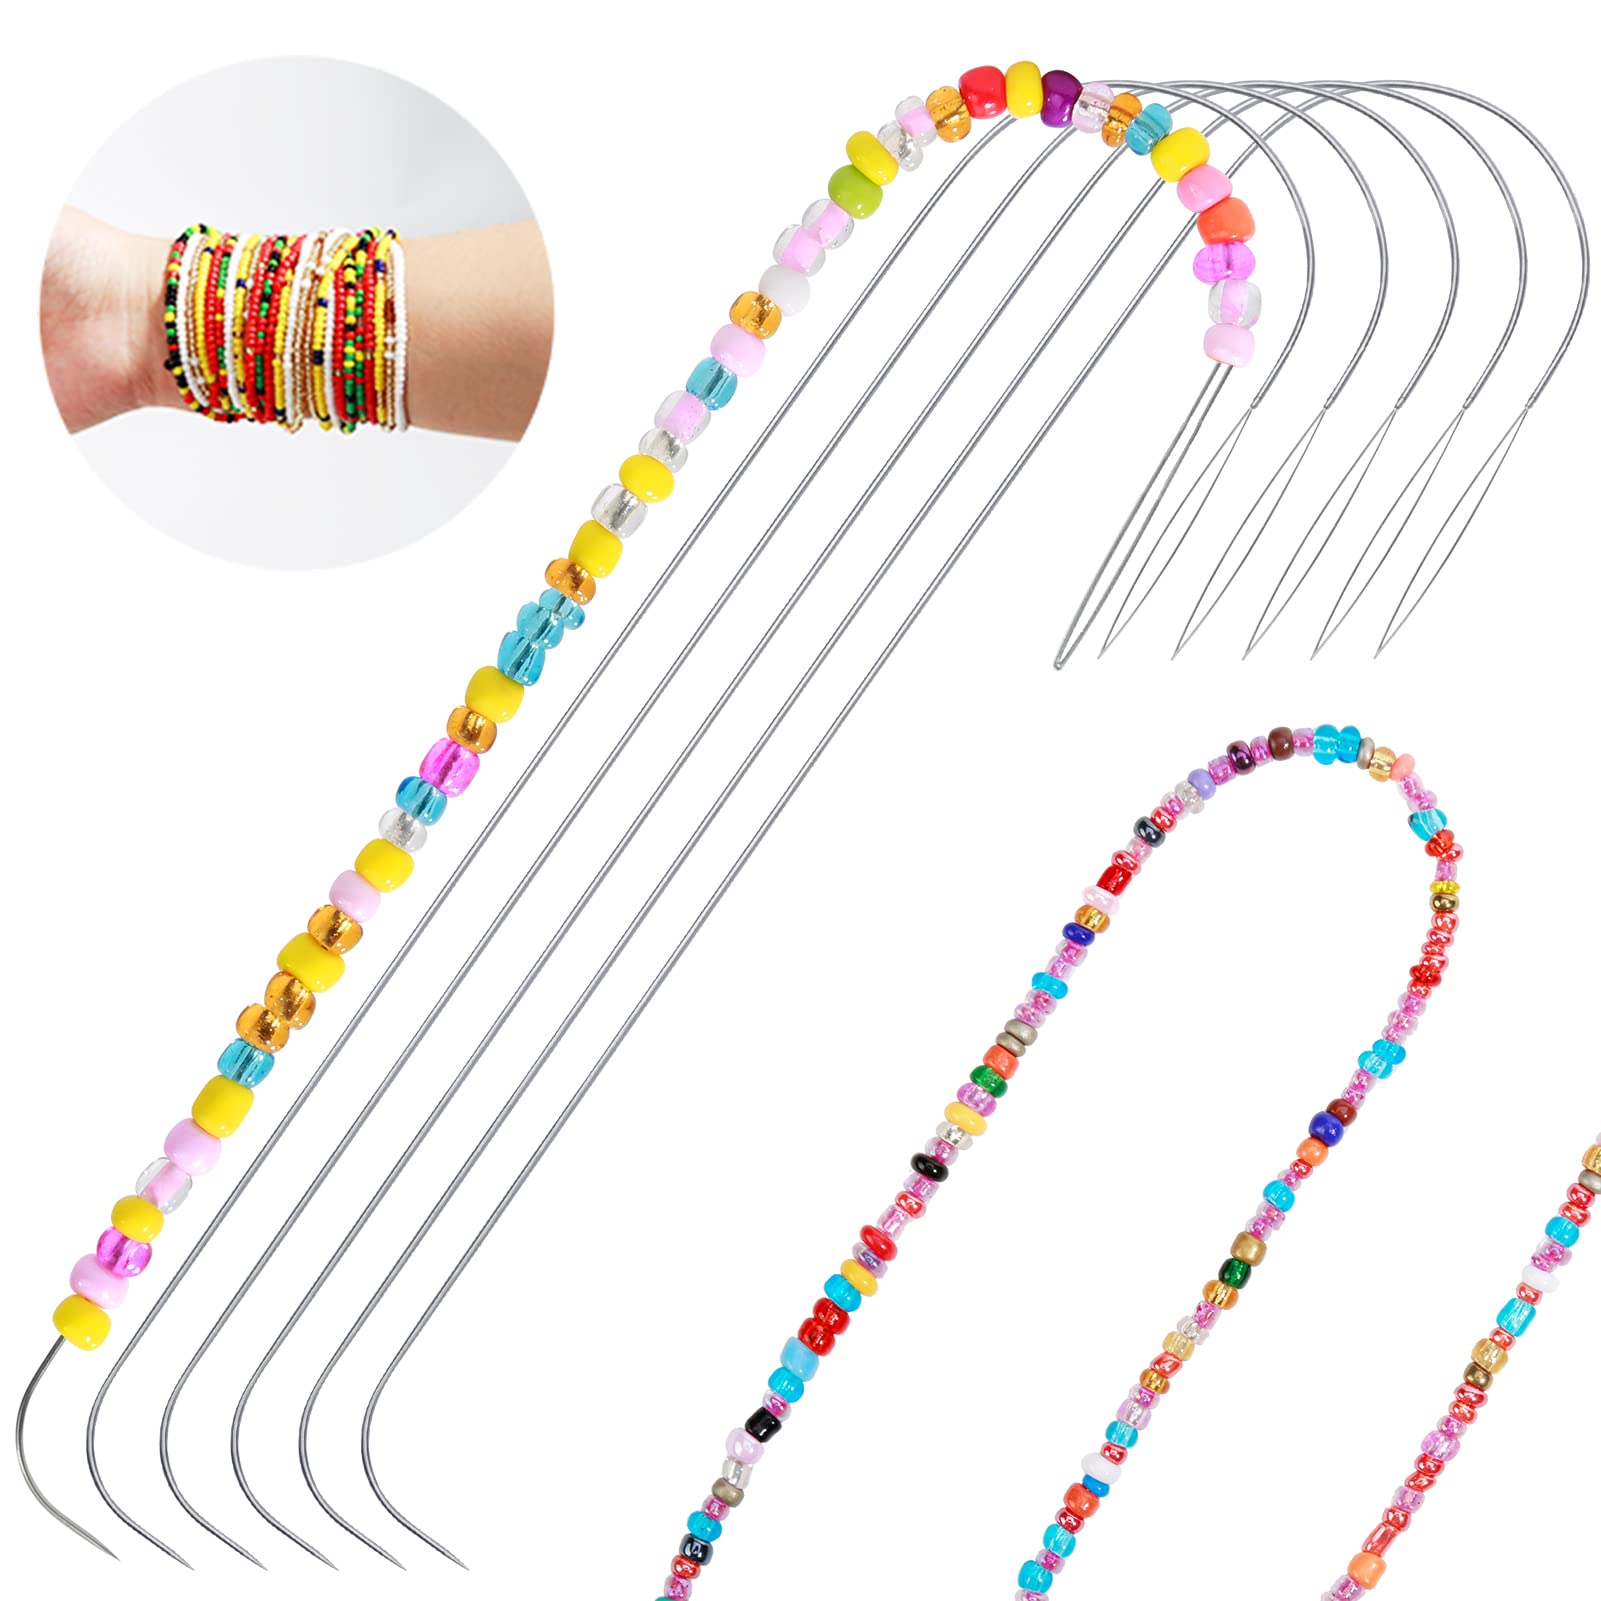 10PCS CURVED BEADING Needles Stainless Steel DIY Bead Spinner Needles  Curved MFS $24.80 - PicClick AU